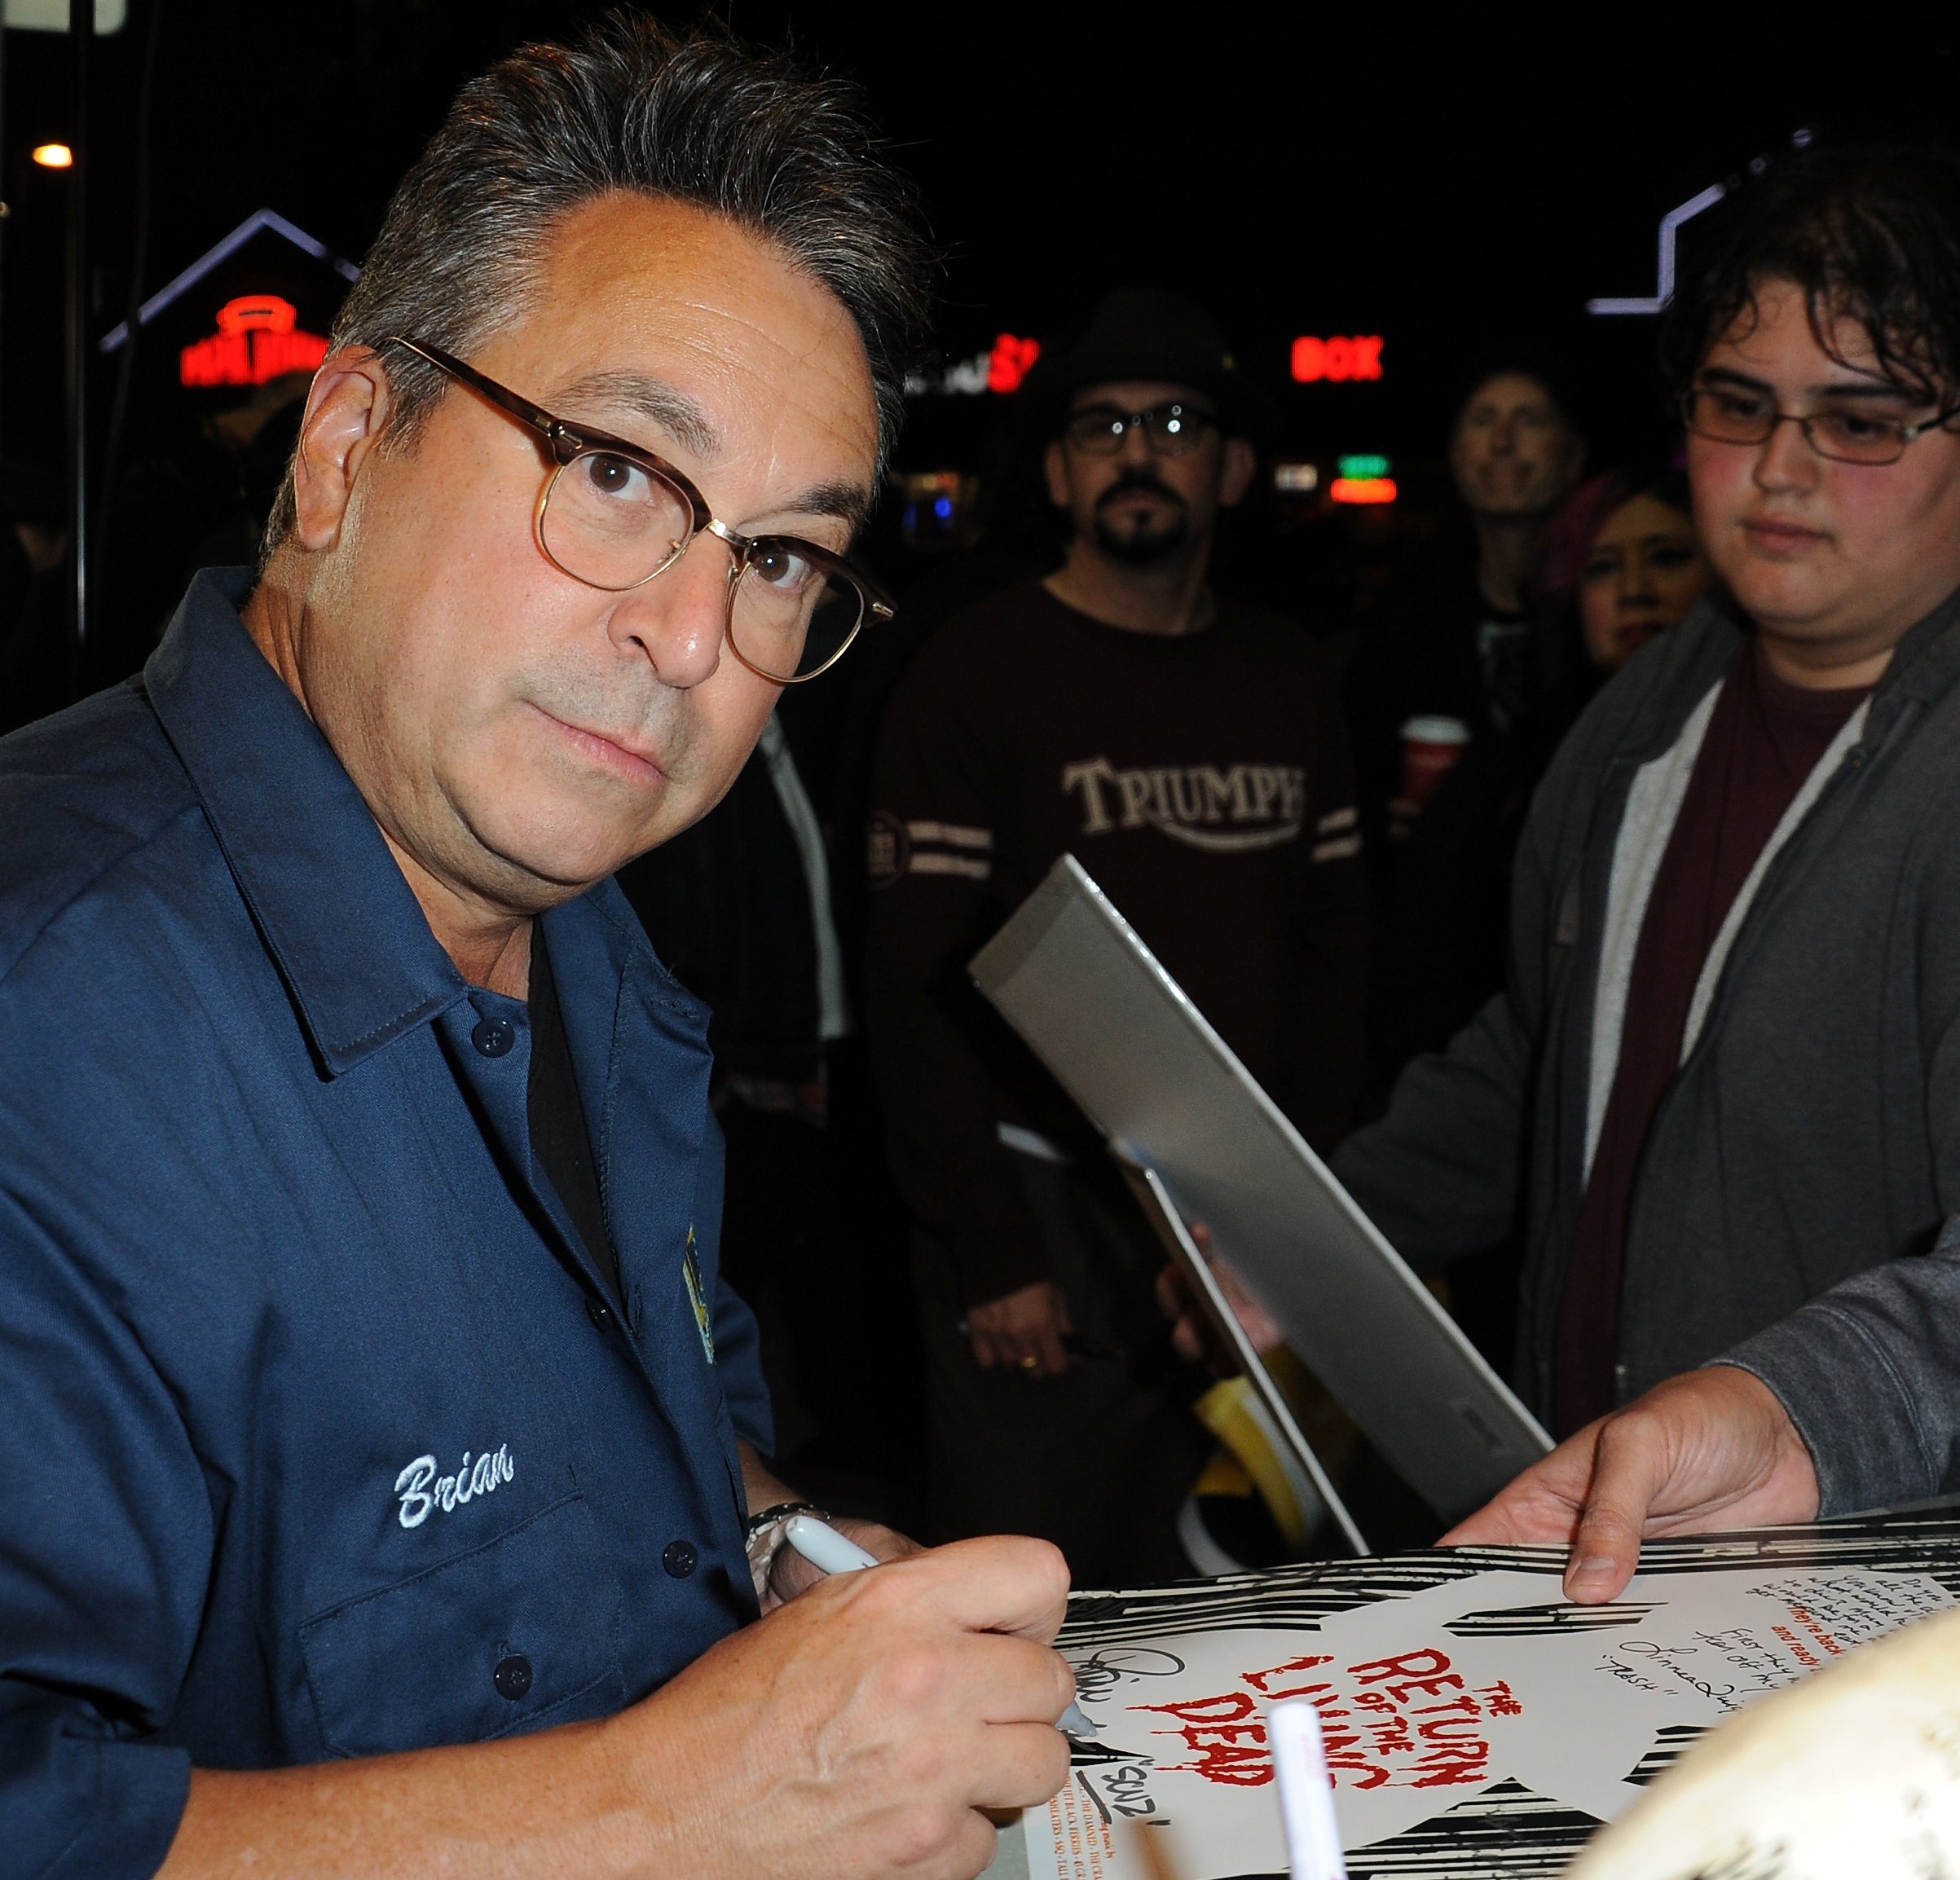 Brian Peck in glasses and blue shirt signing autographs for fans